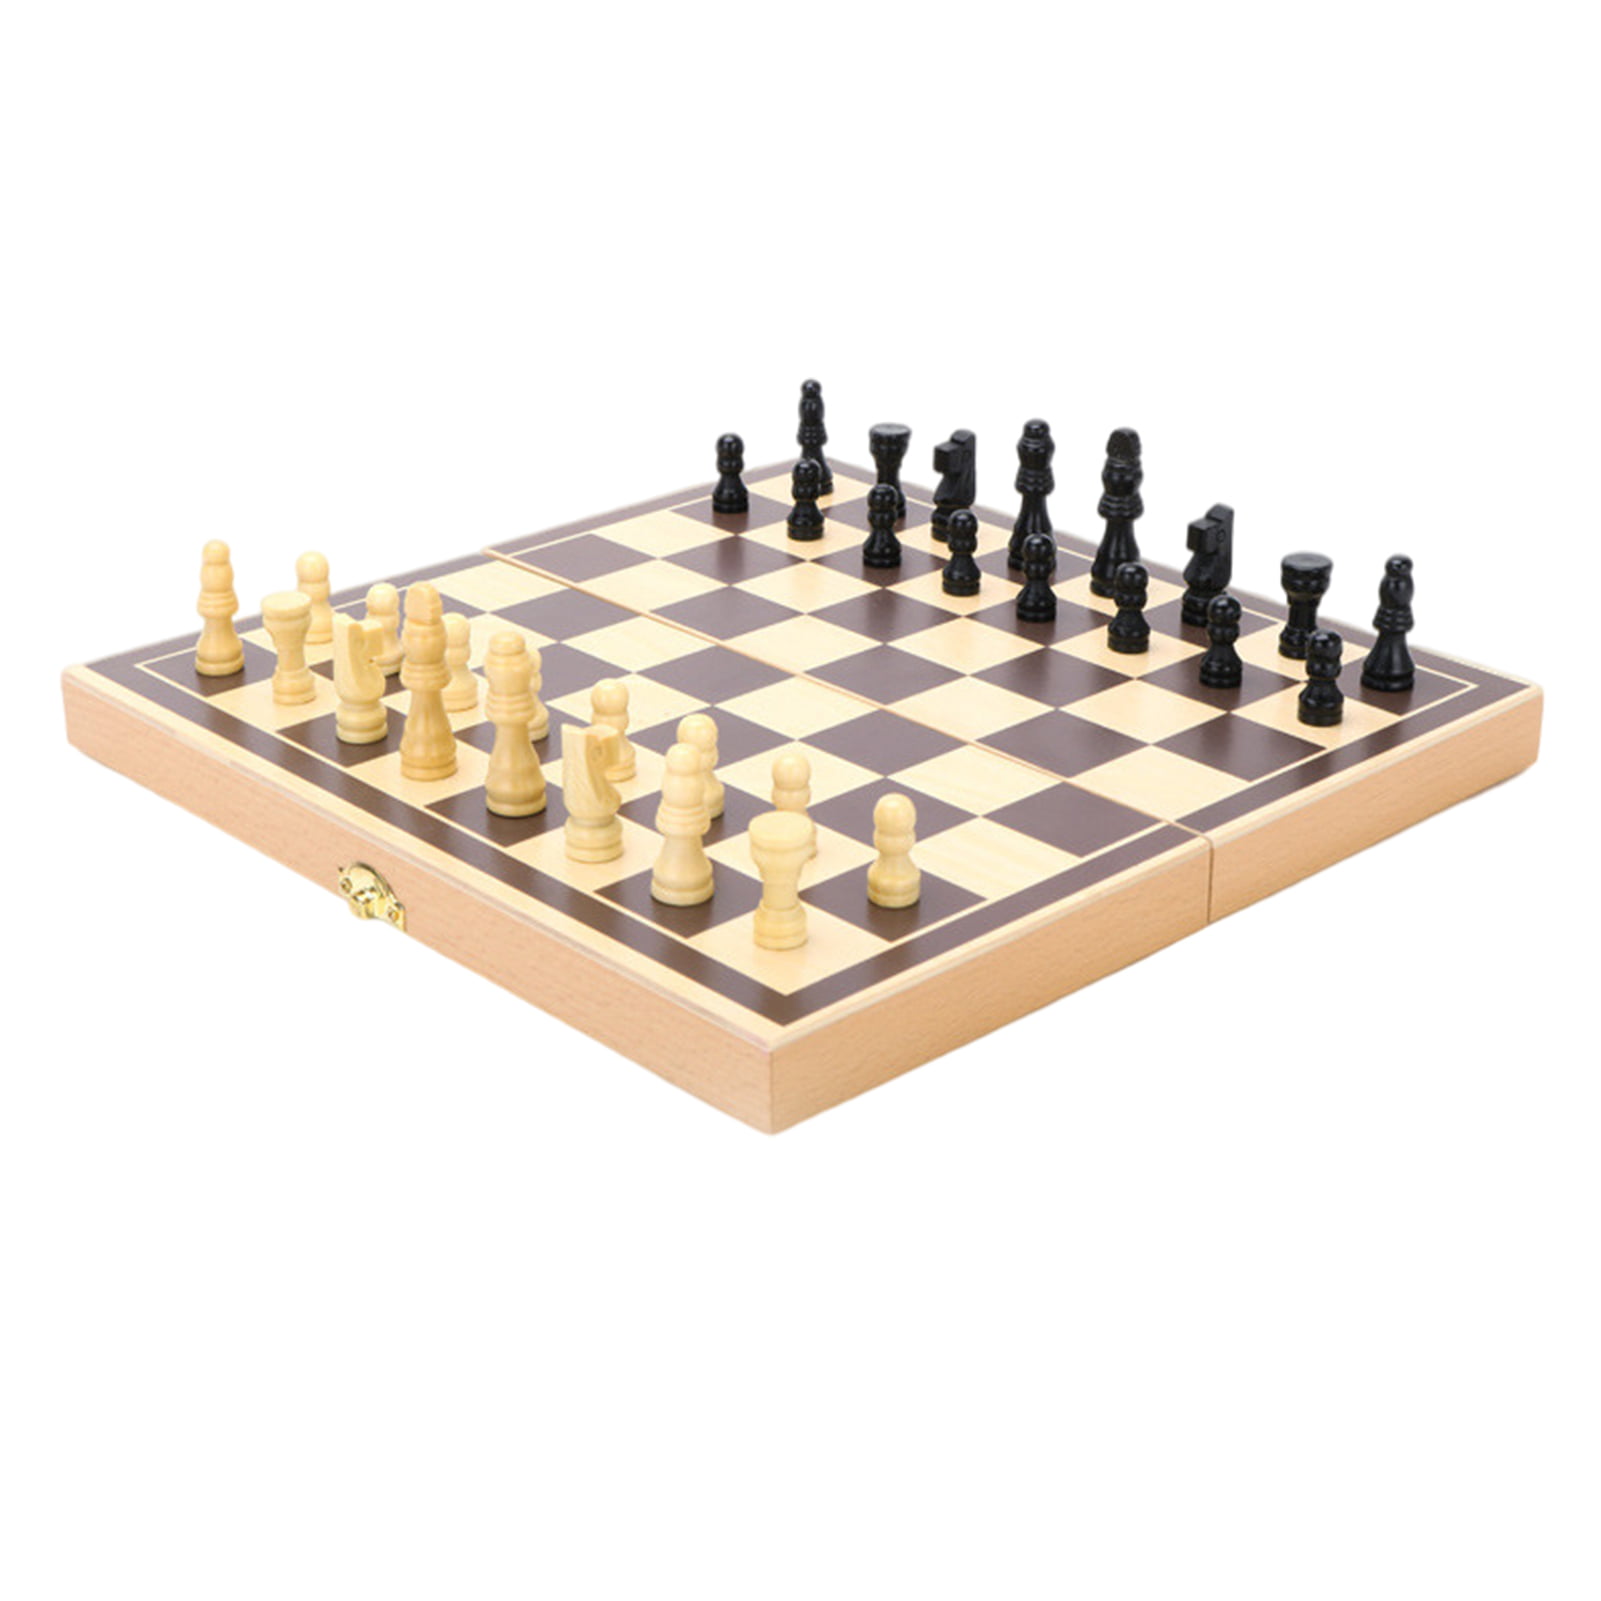 Folding Wood Chess Game Set Wooden Board Crafted Chessboard Travel Portable 